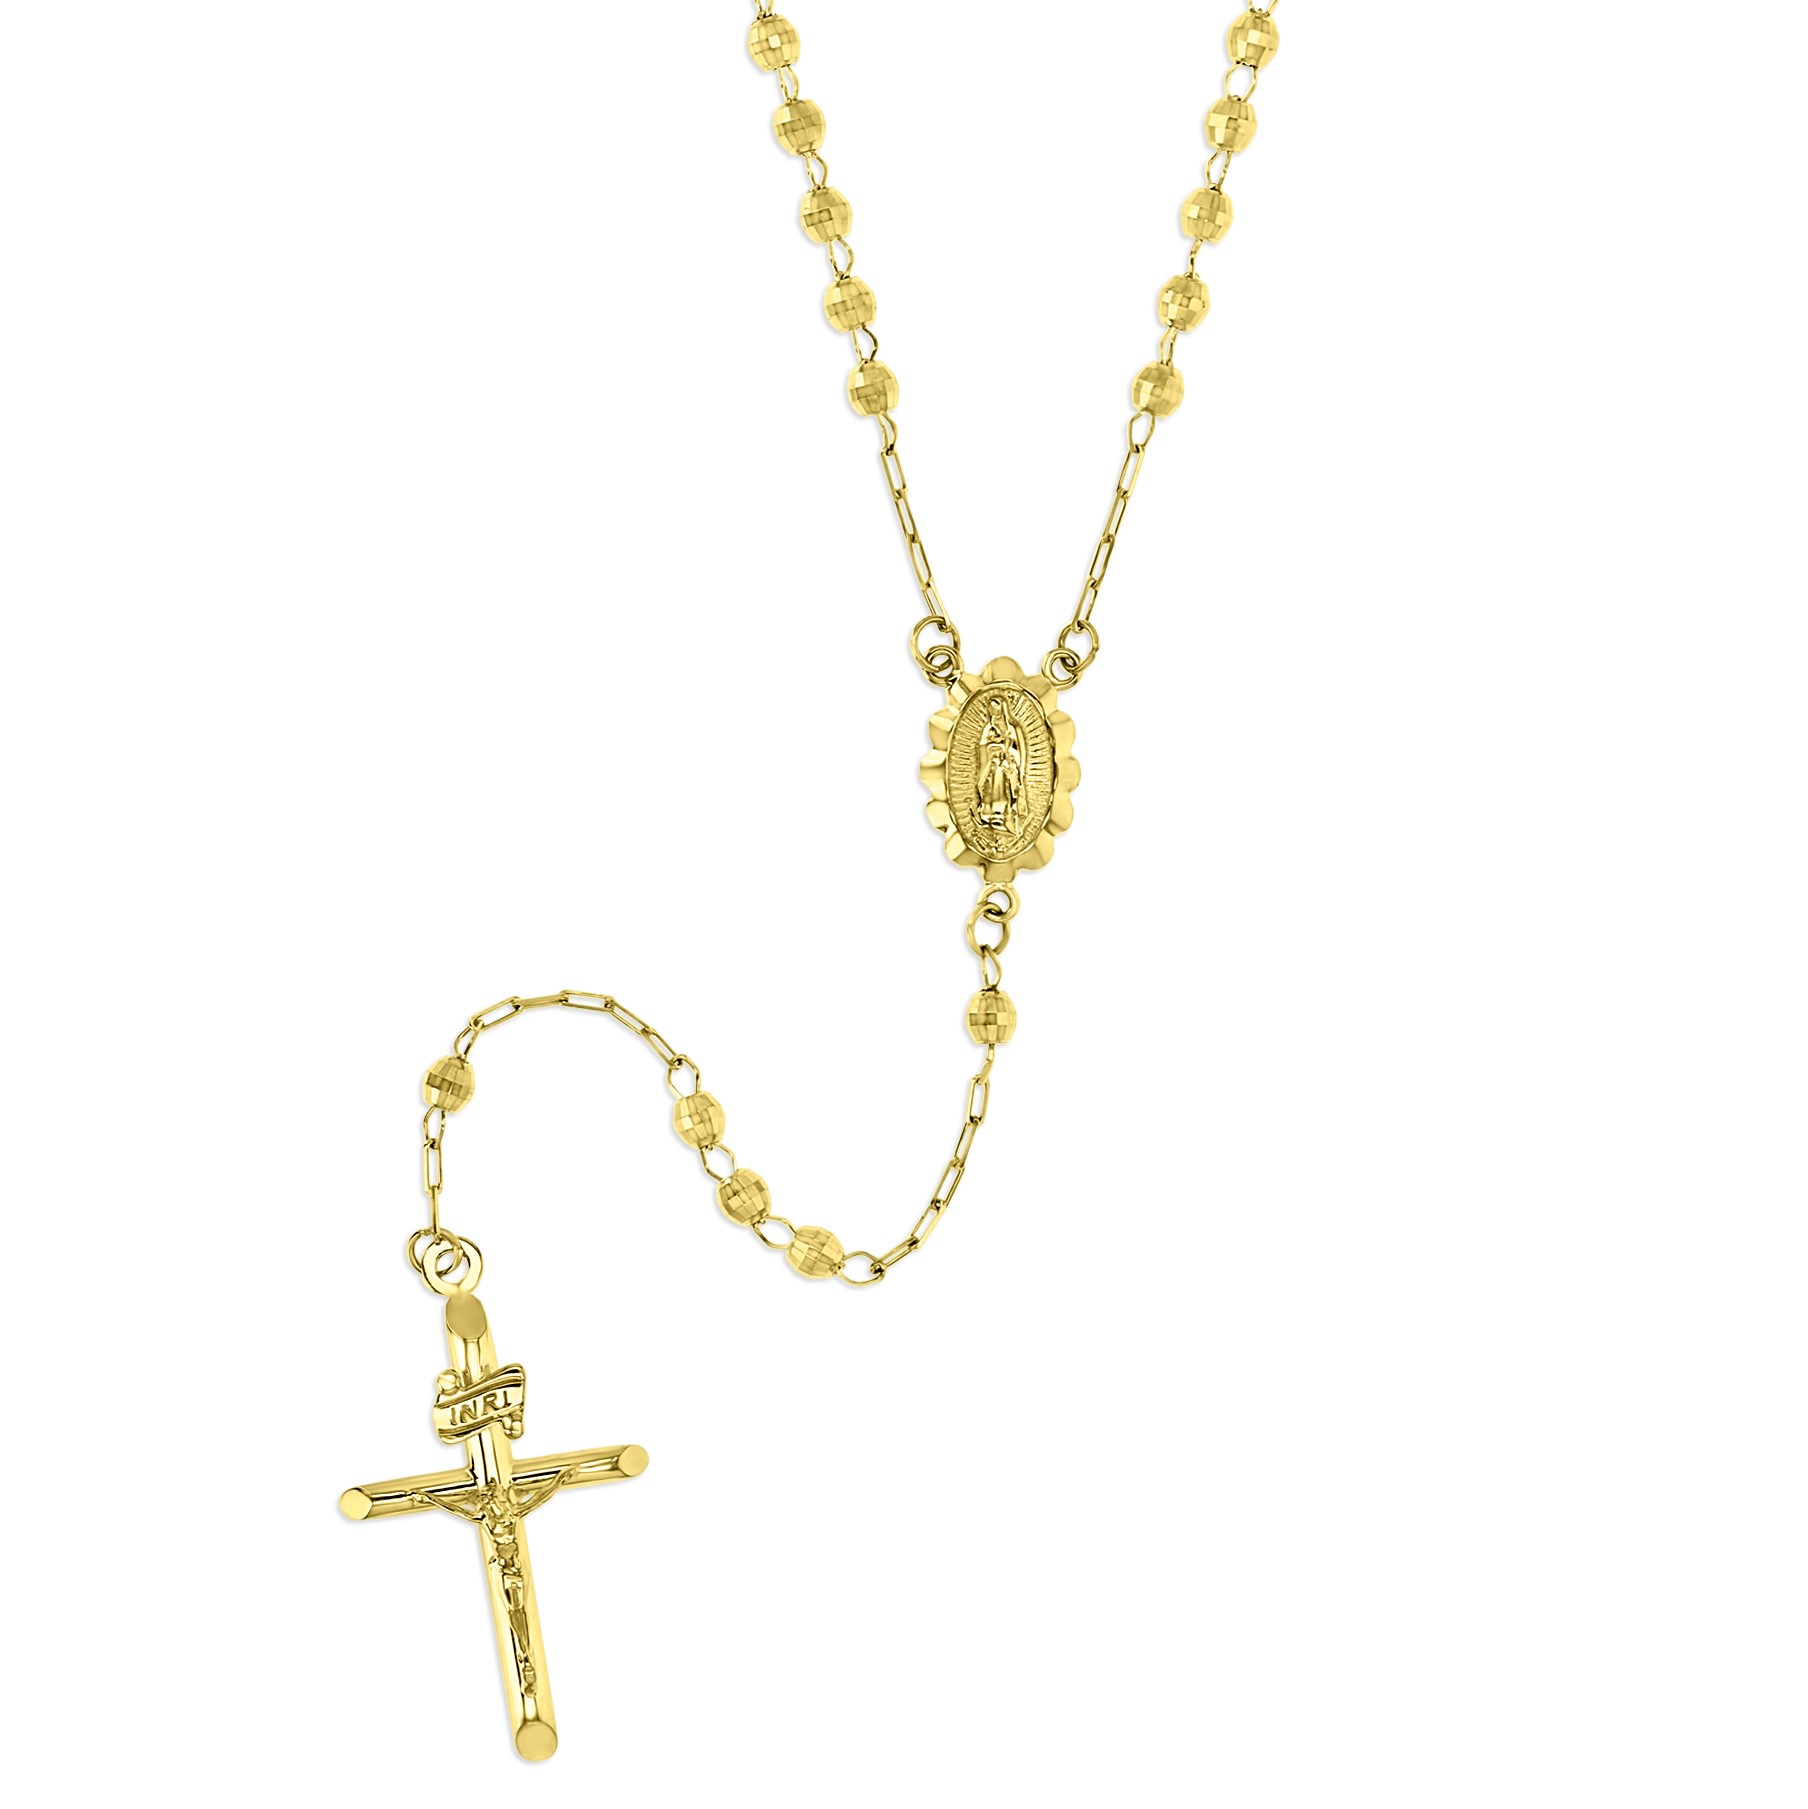 14K Yellow Gold 3MM Diamond Cut Beads Rosary Necklace